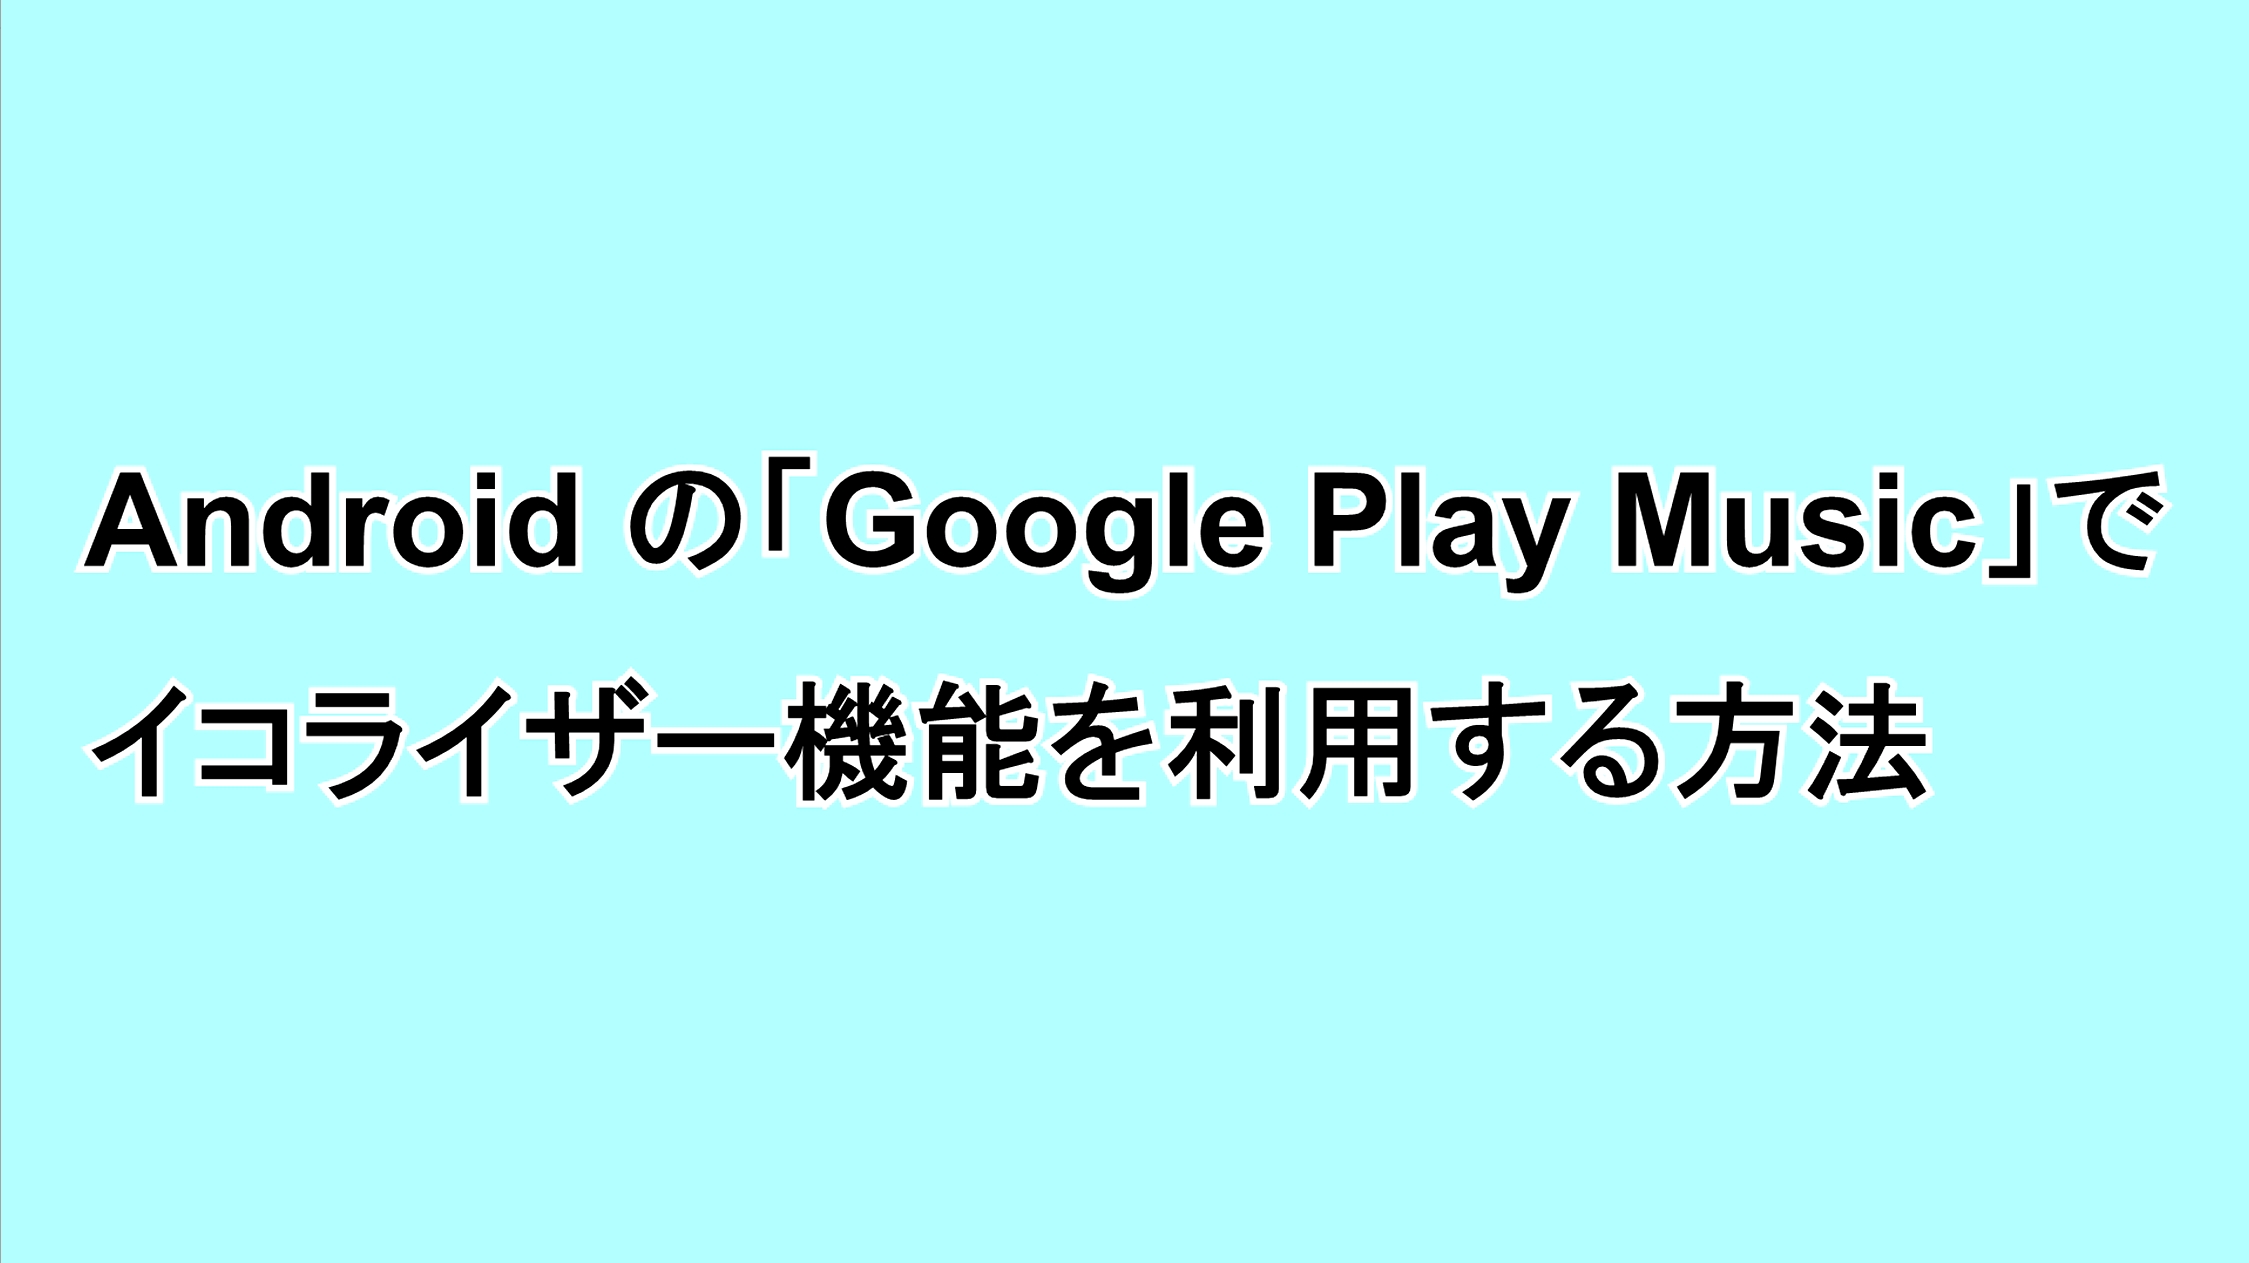 Androidの「Google Play Music」でイコライザー機能を利用する方法